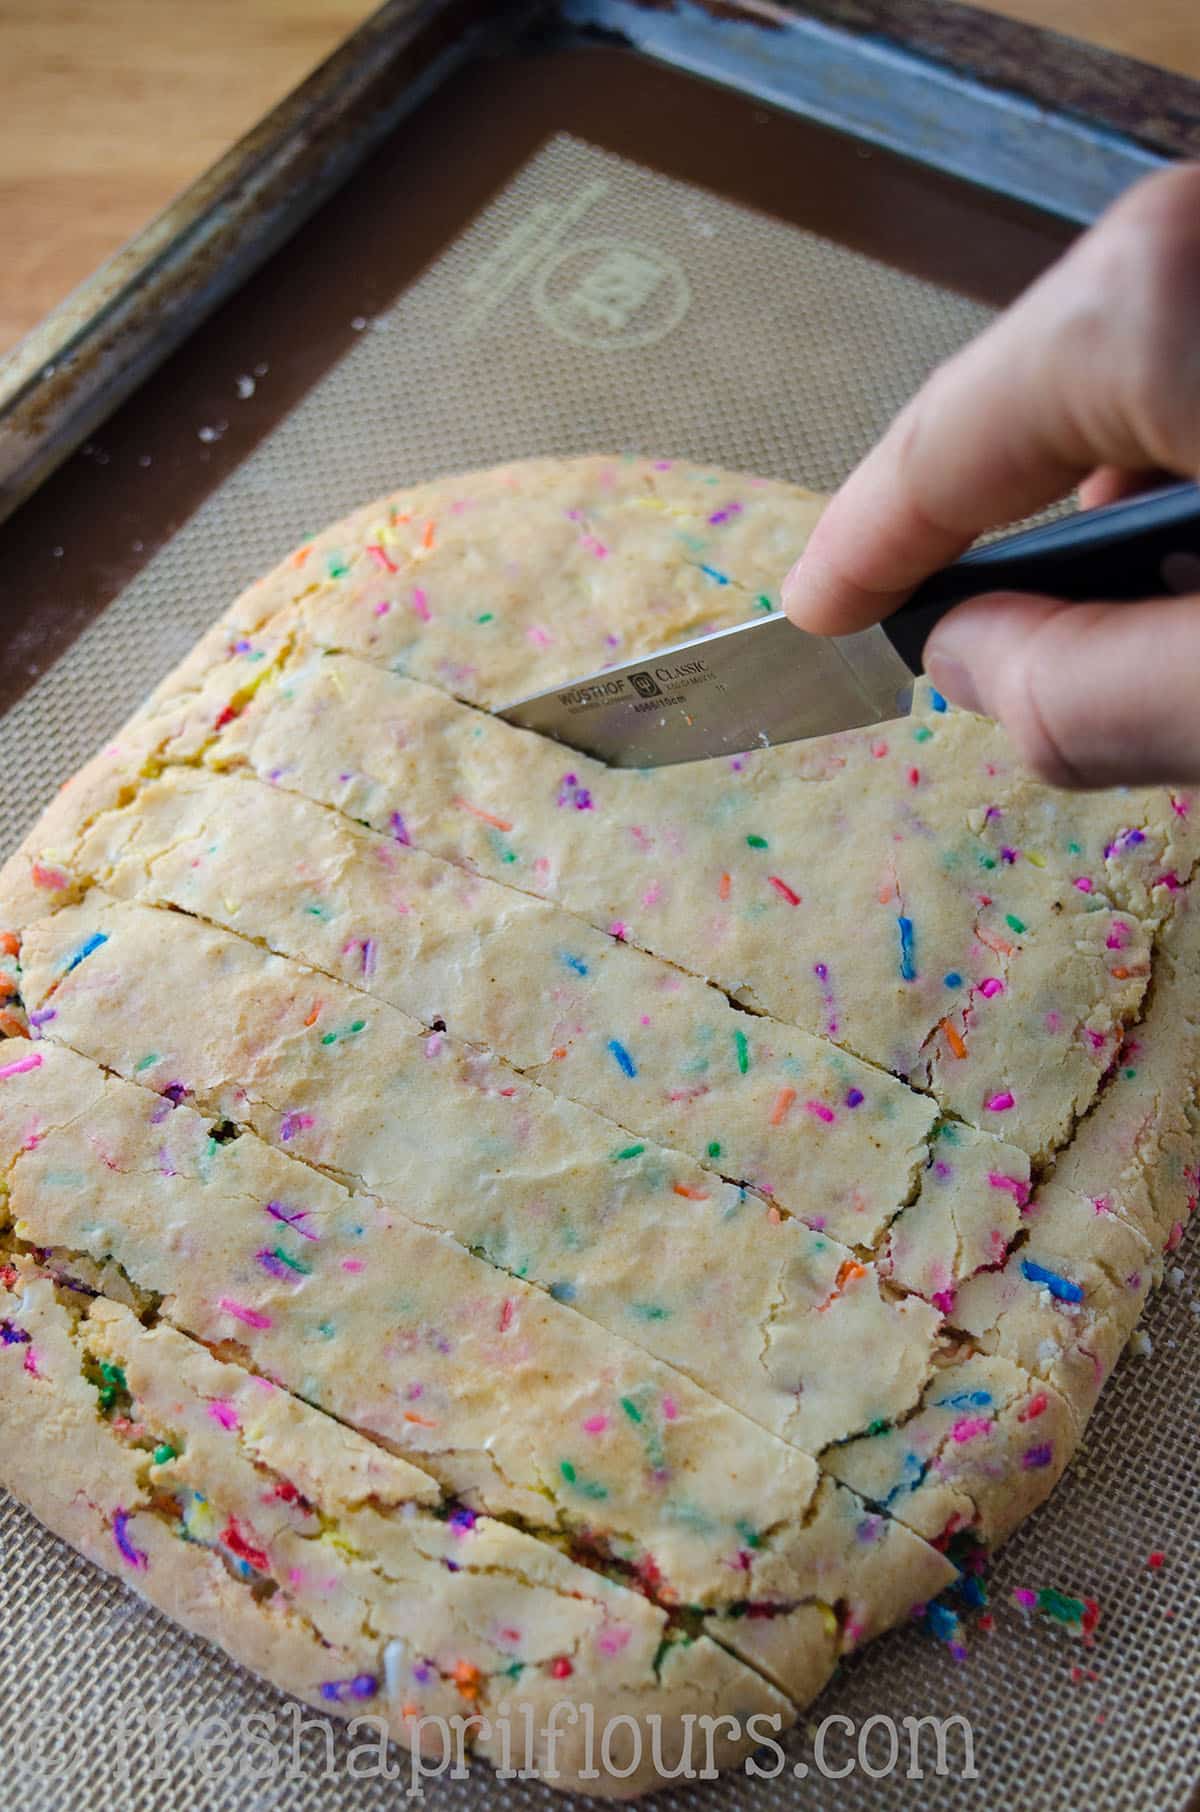 Slicing a slab of biscotti dough with a knife.